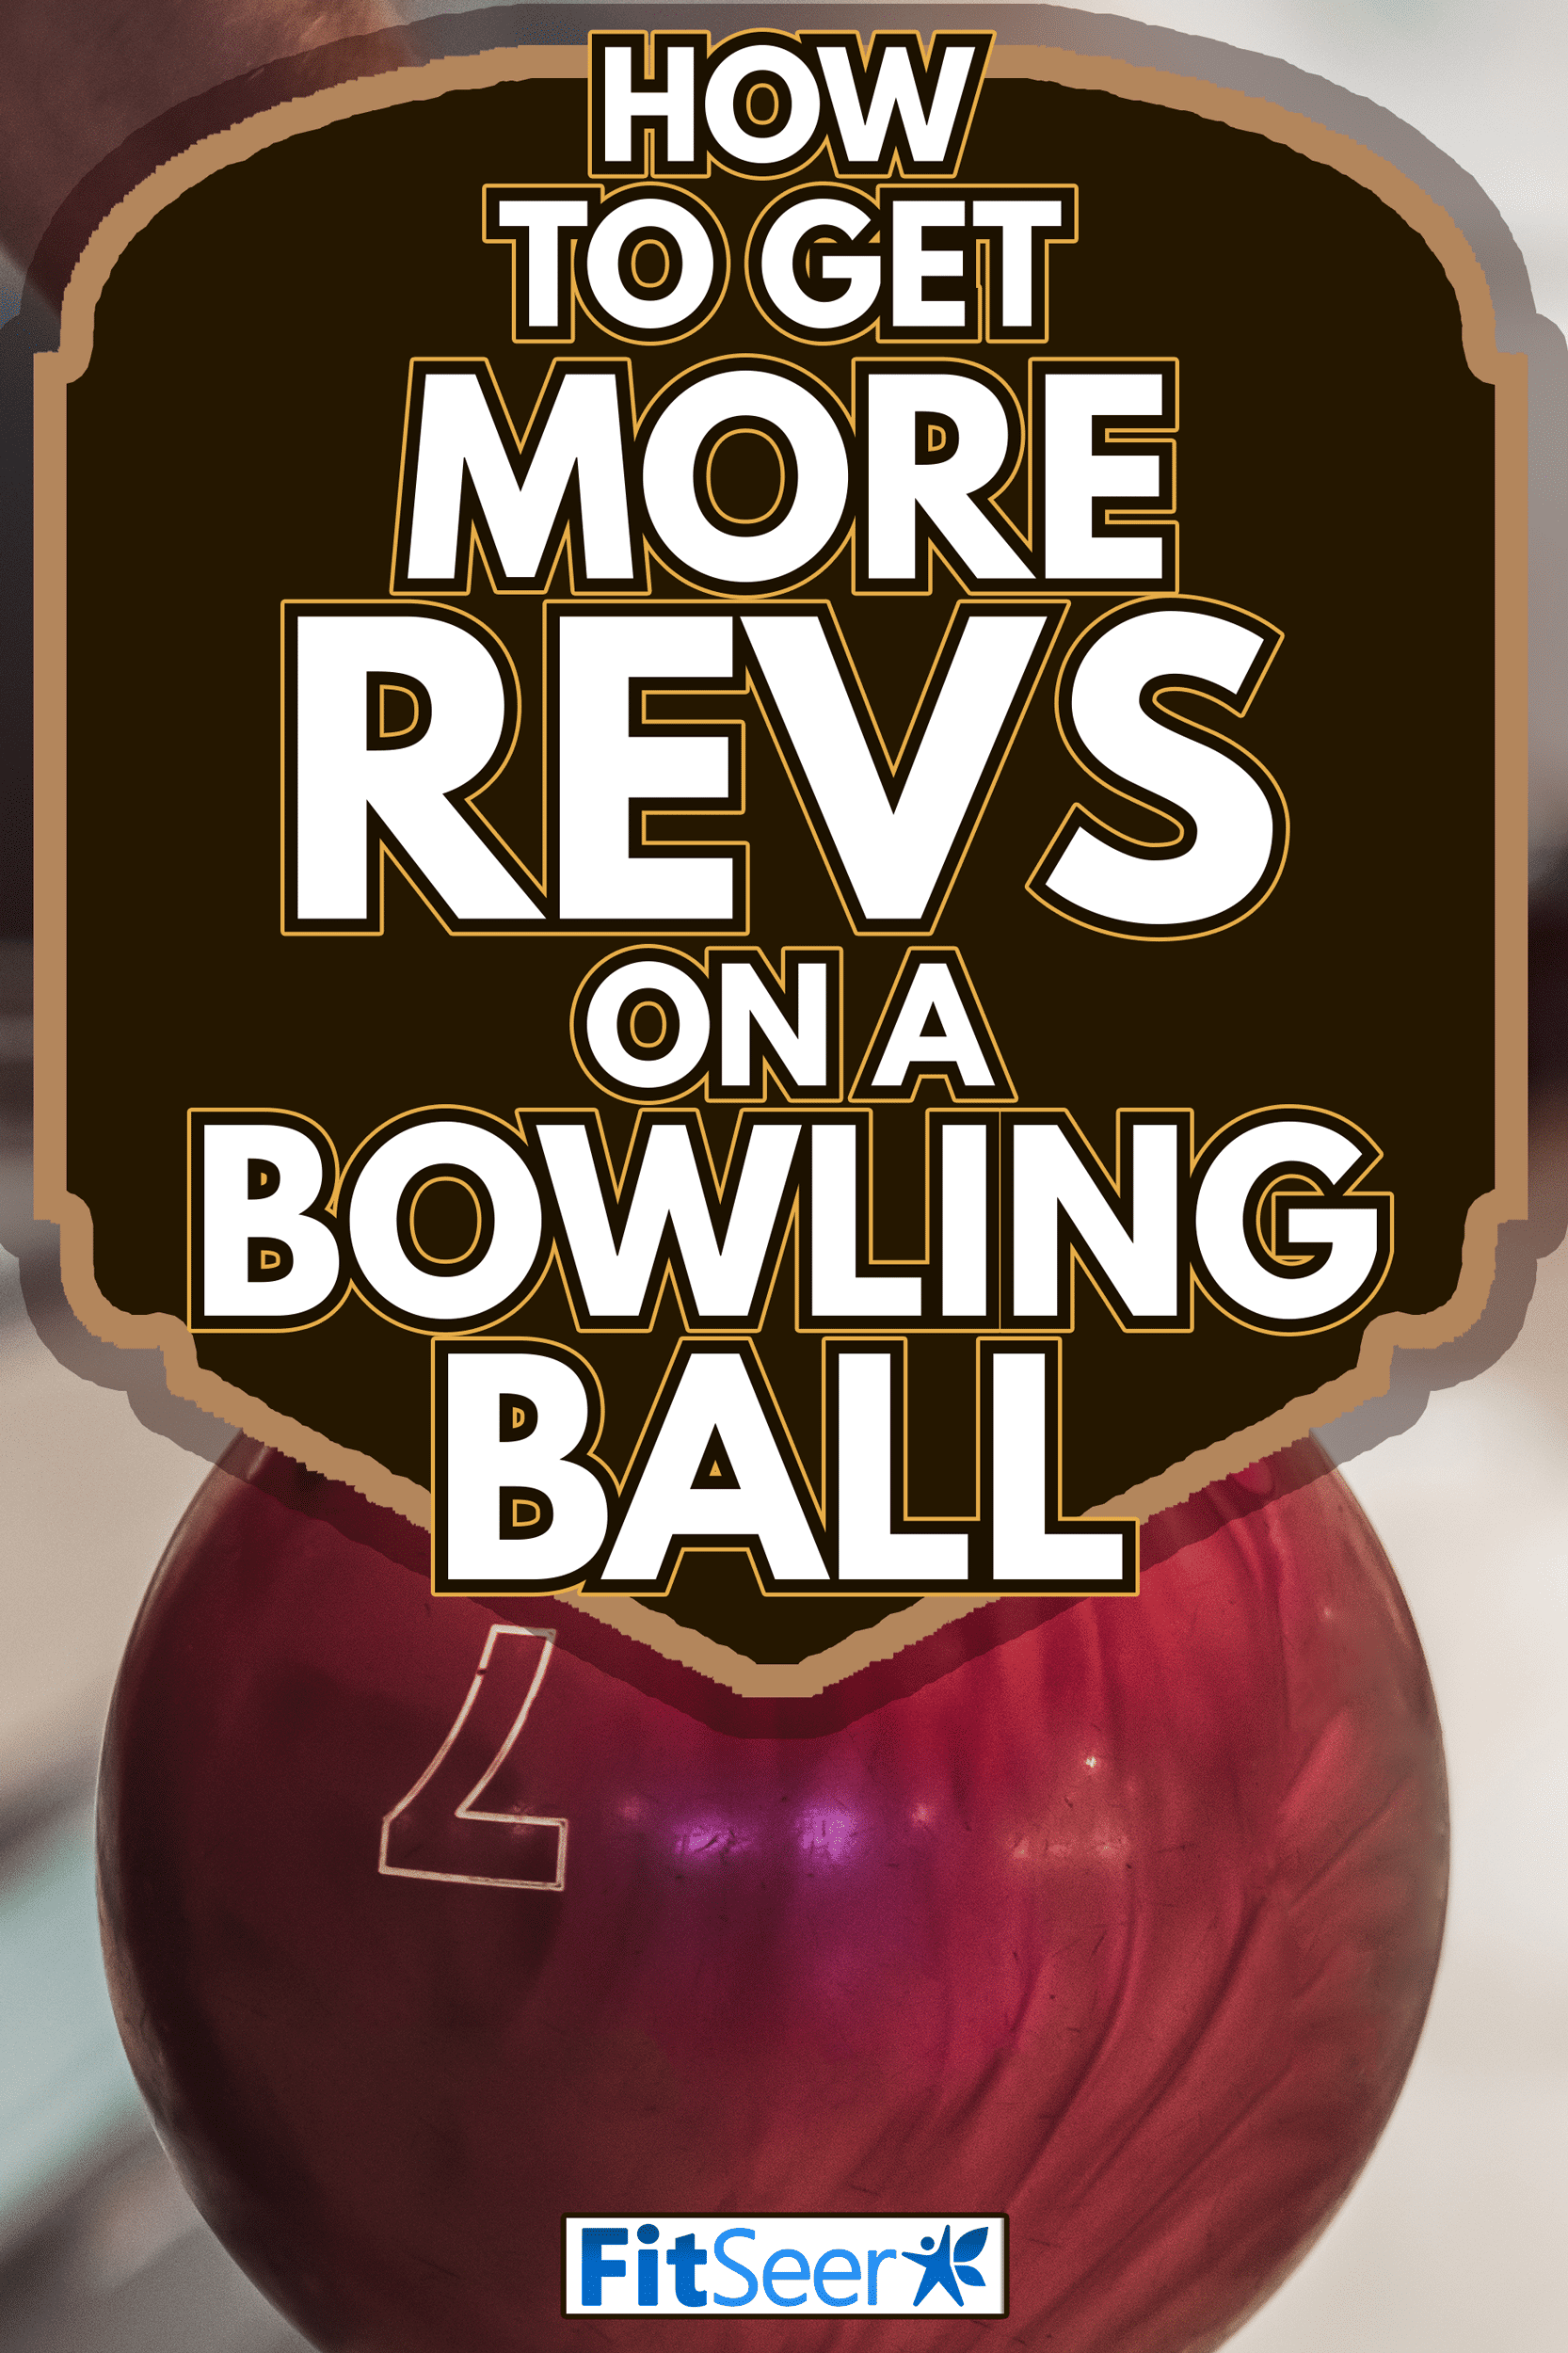 Man's hand holding a red bowling ball ready to throw it - How To Get More Revs On A Bowling Ball